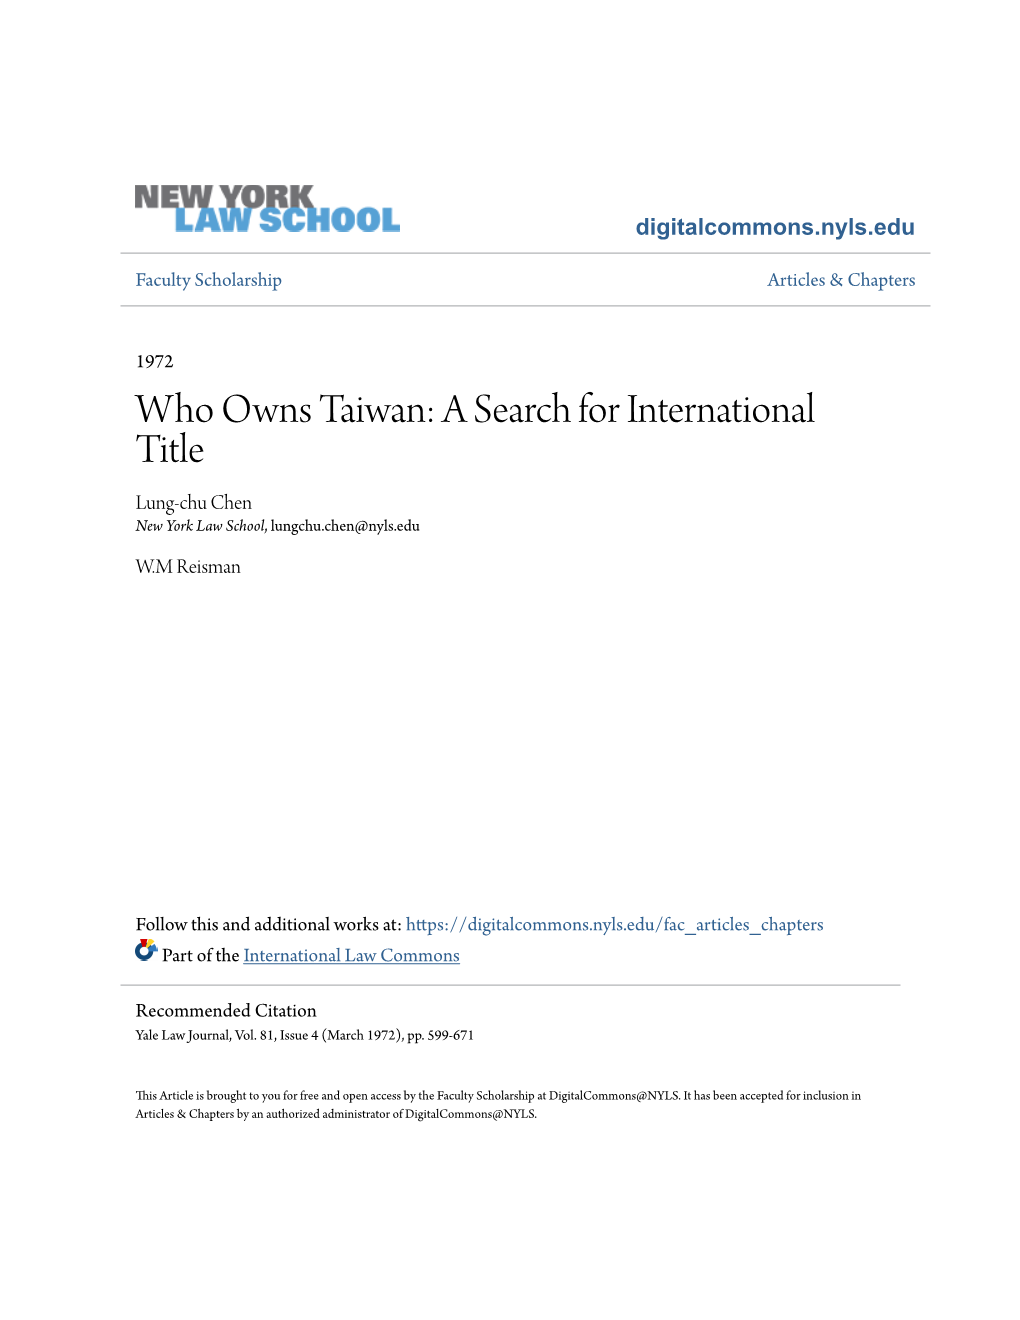 Who Owns Taiwan: a Search for International Title Lung-Chu Chen New York Law School, Lungchu.Chen@Nyls.Edu